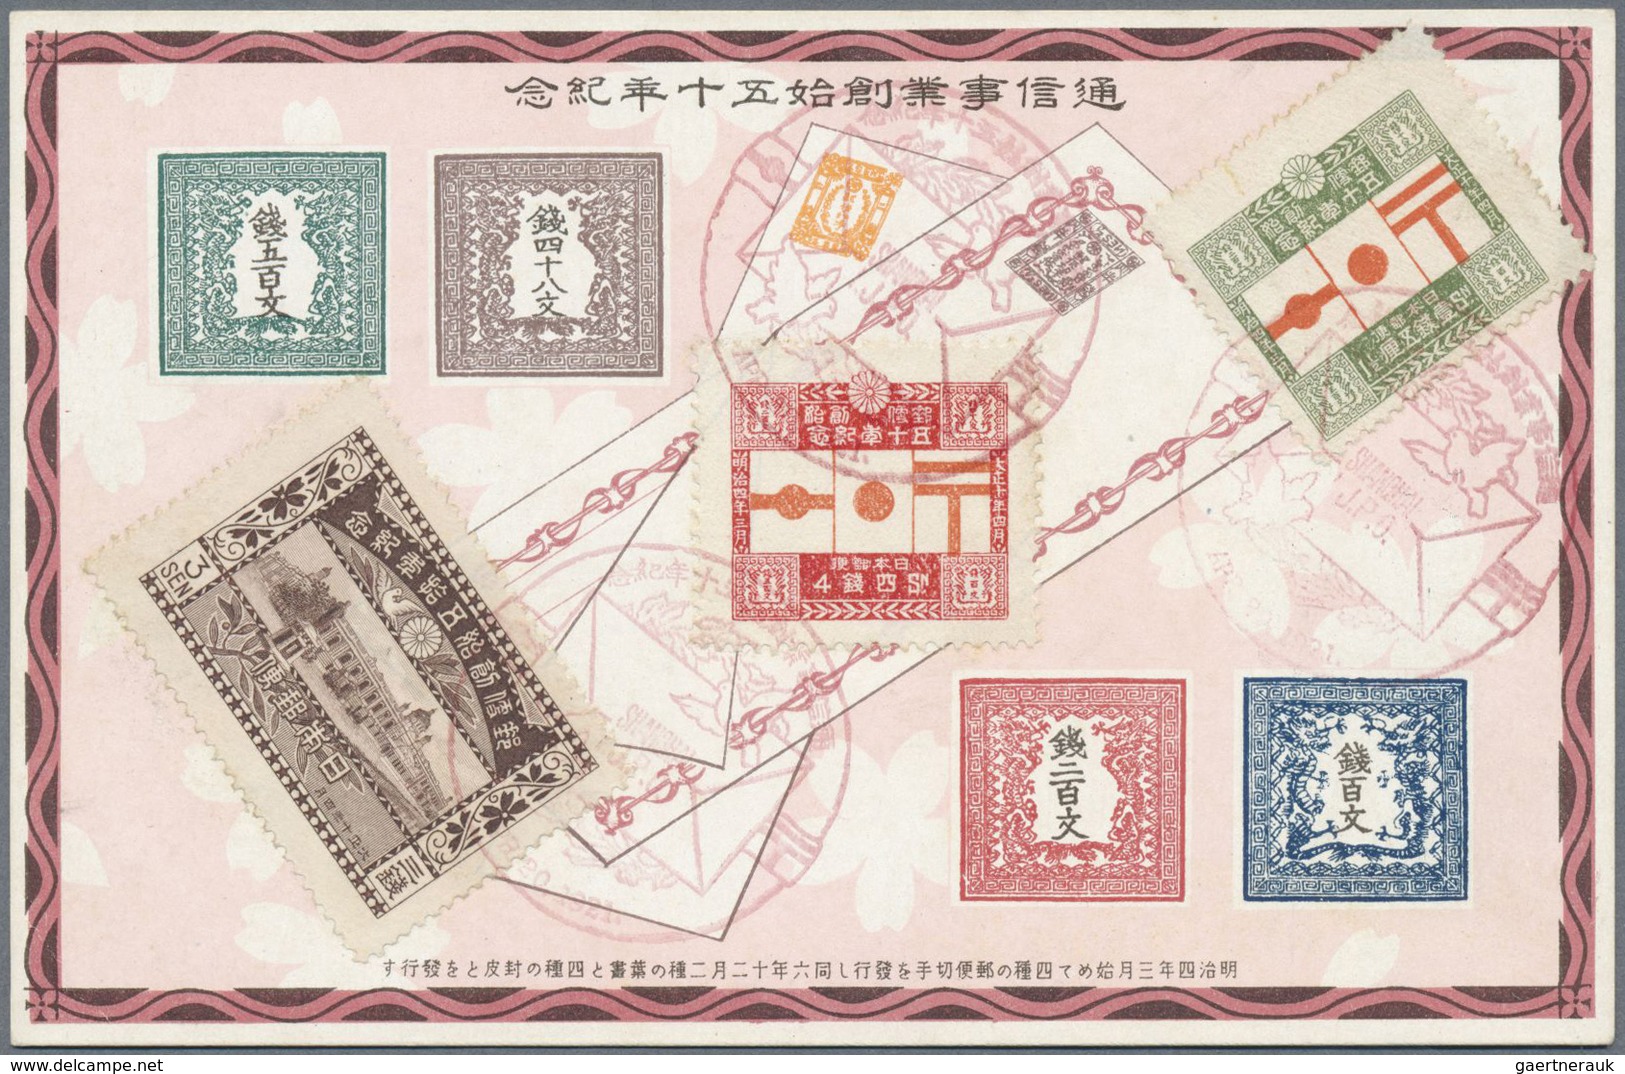 Japan - Besonderheiten: 1900/30, Japan, ppc mint or cto (26) inc. official LCD for WWI peace, imperi